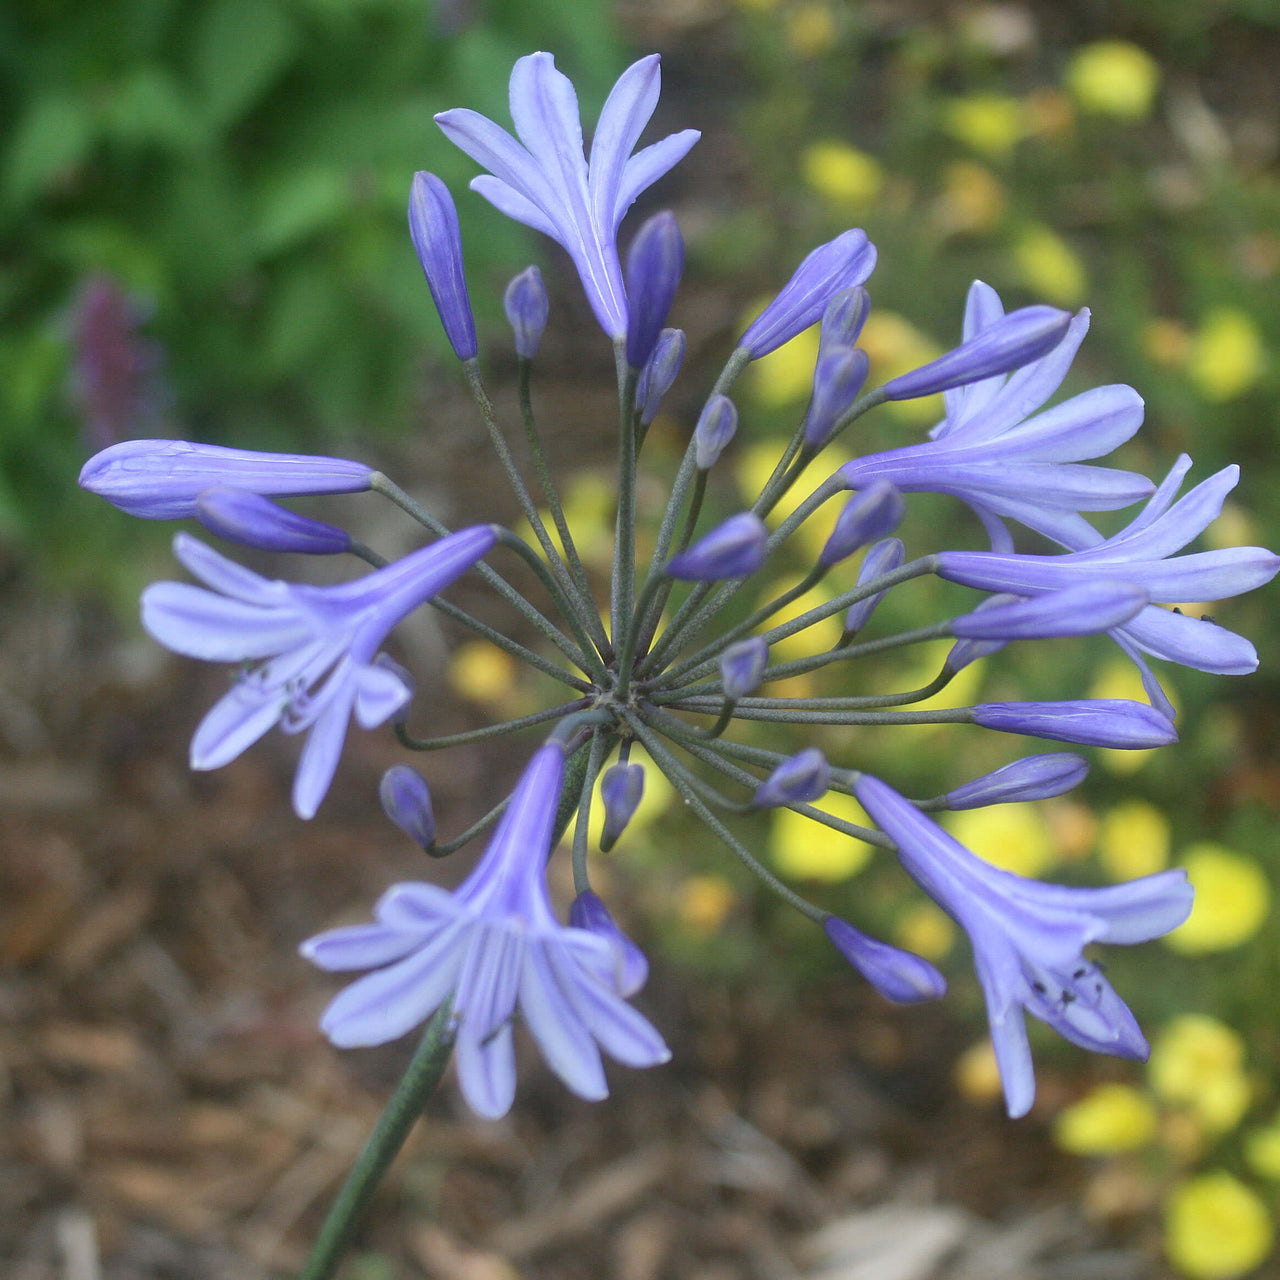 Agapanthus africanus 'Peter Pan' Lily of the Nile